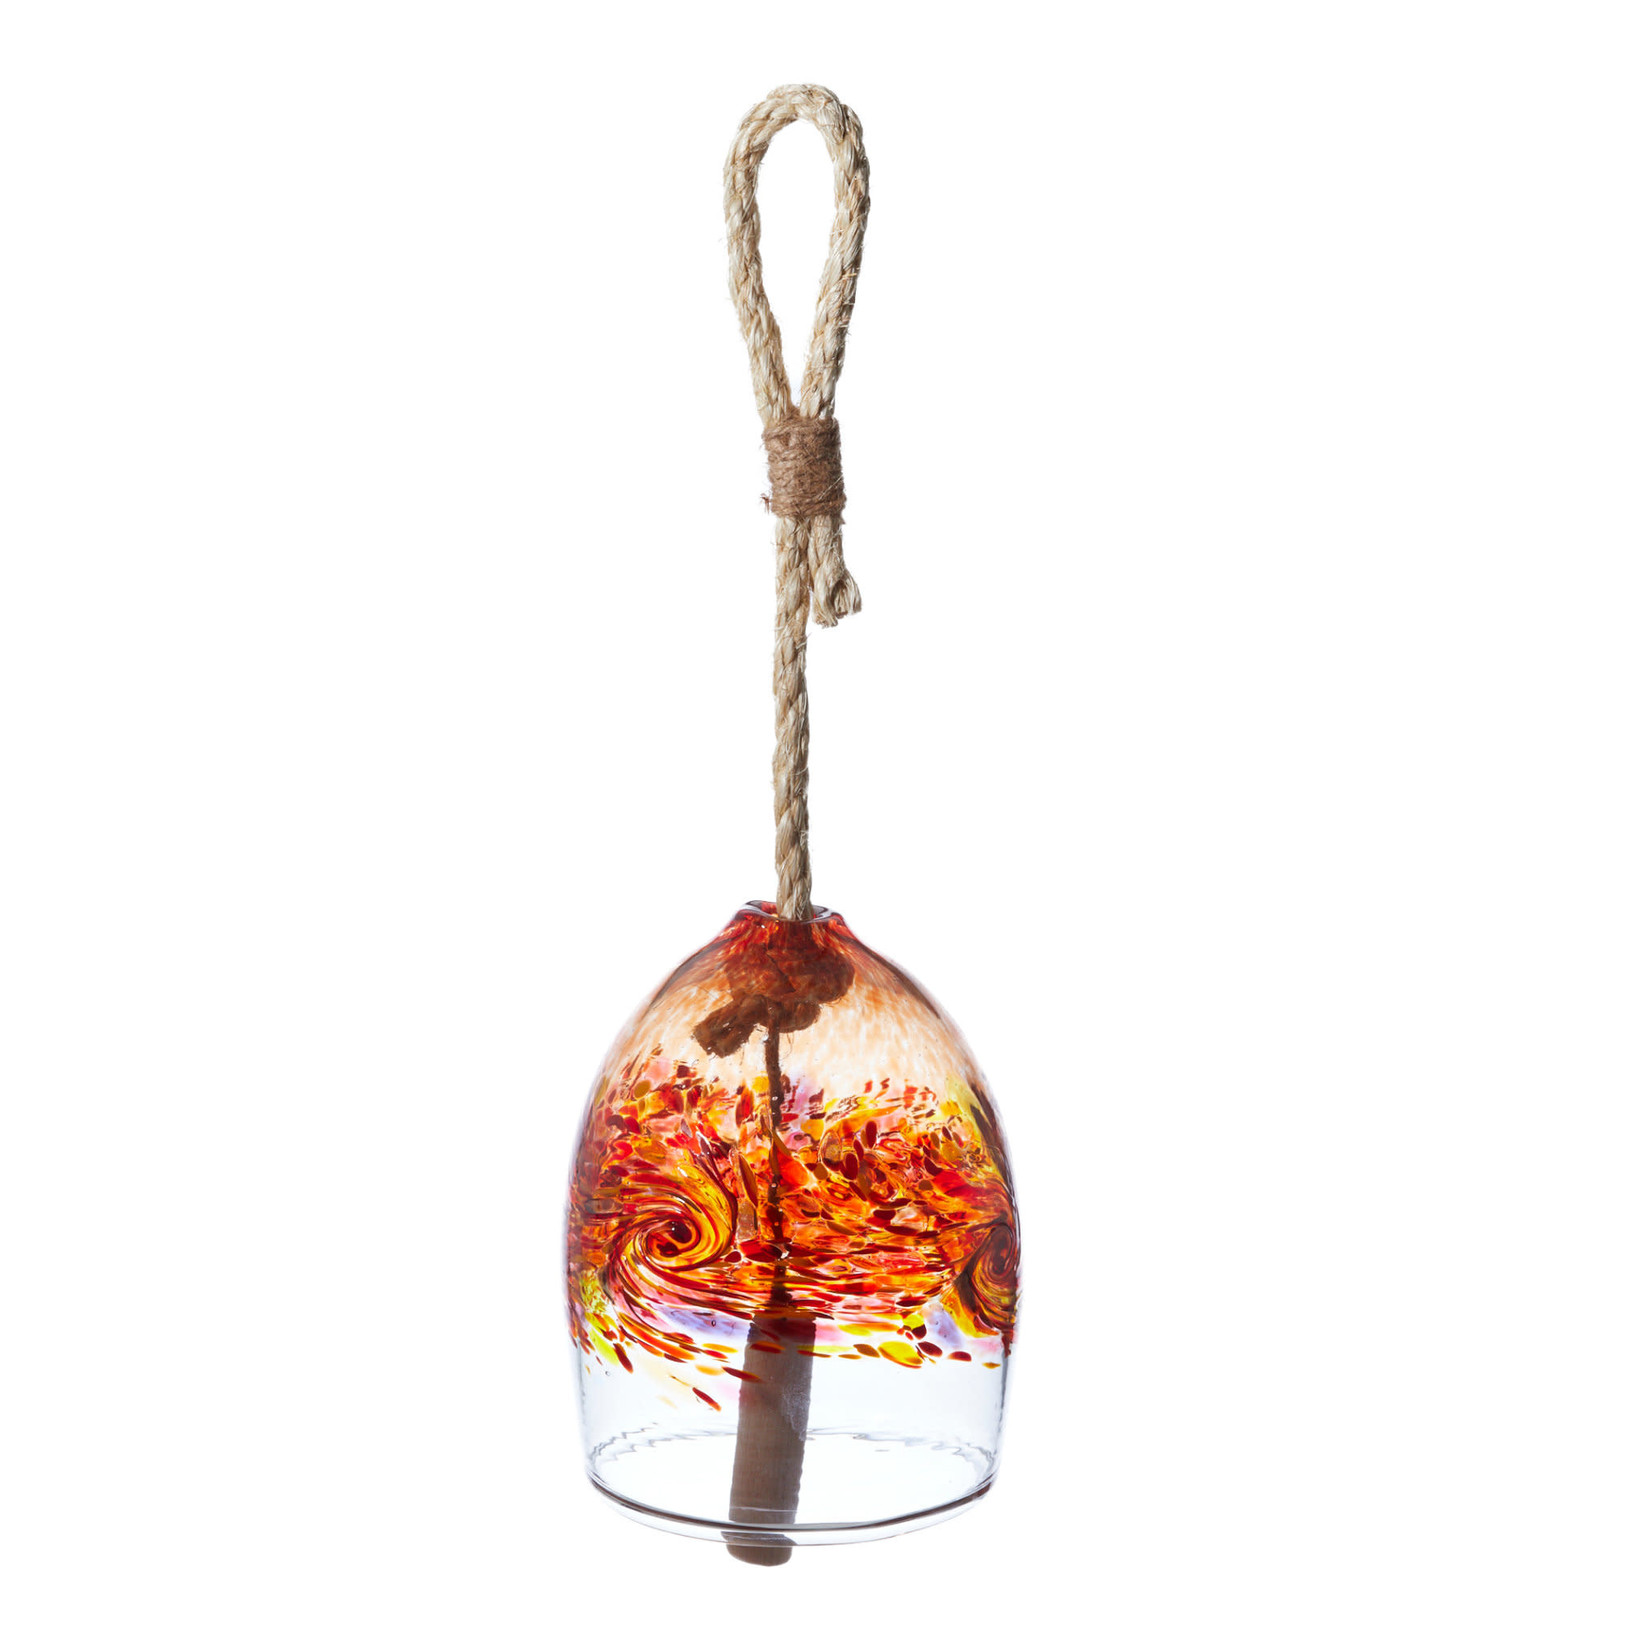 KITRAS 4" GLASS GARDEN BELL - ELEMENTS COLLECTION